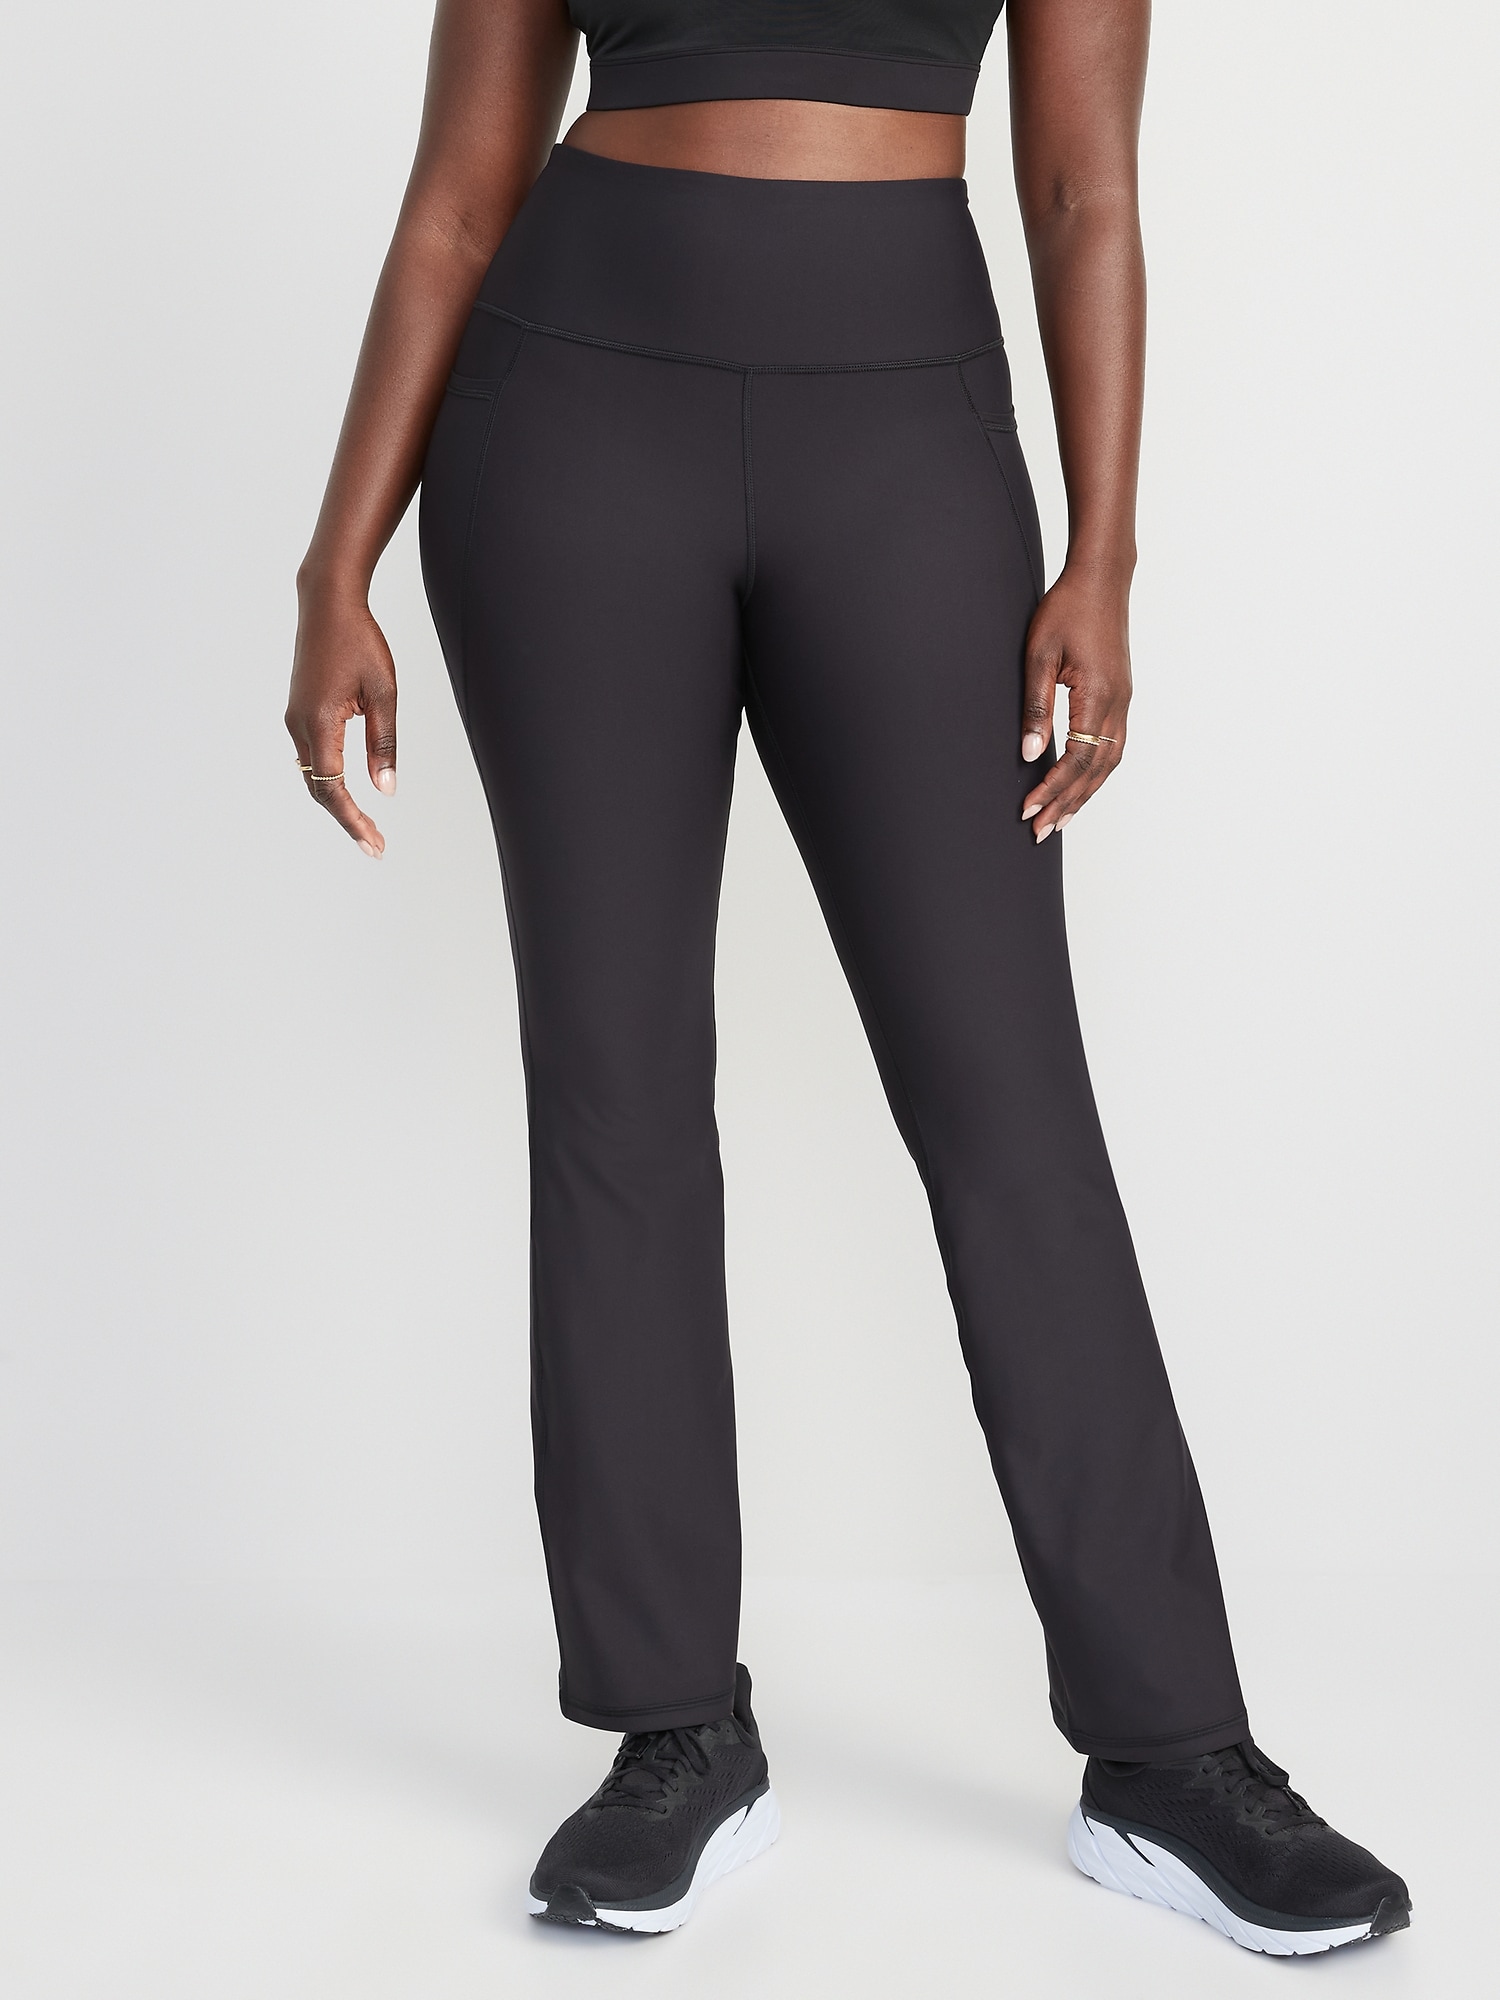 High-Waisted PowerSoft Slim Flare Pants for Women | Old Navy